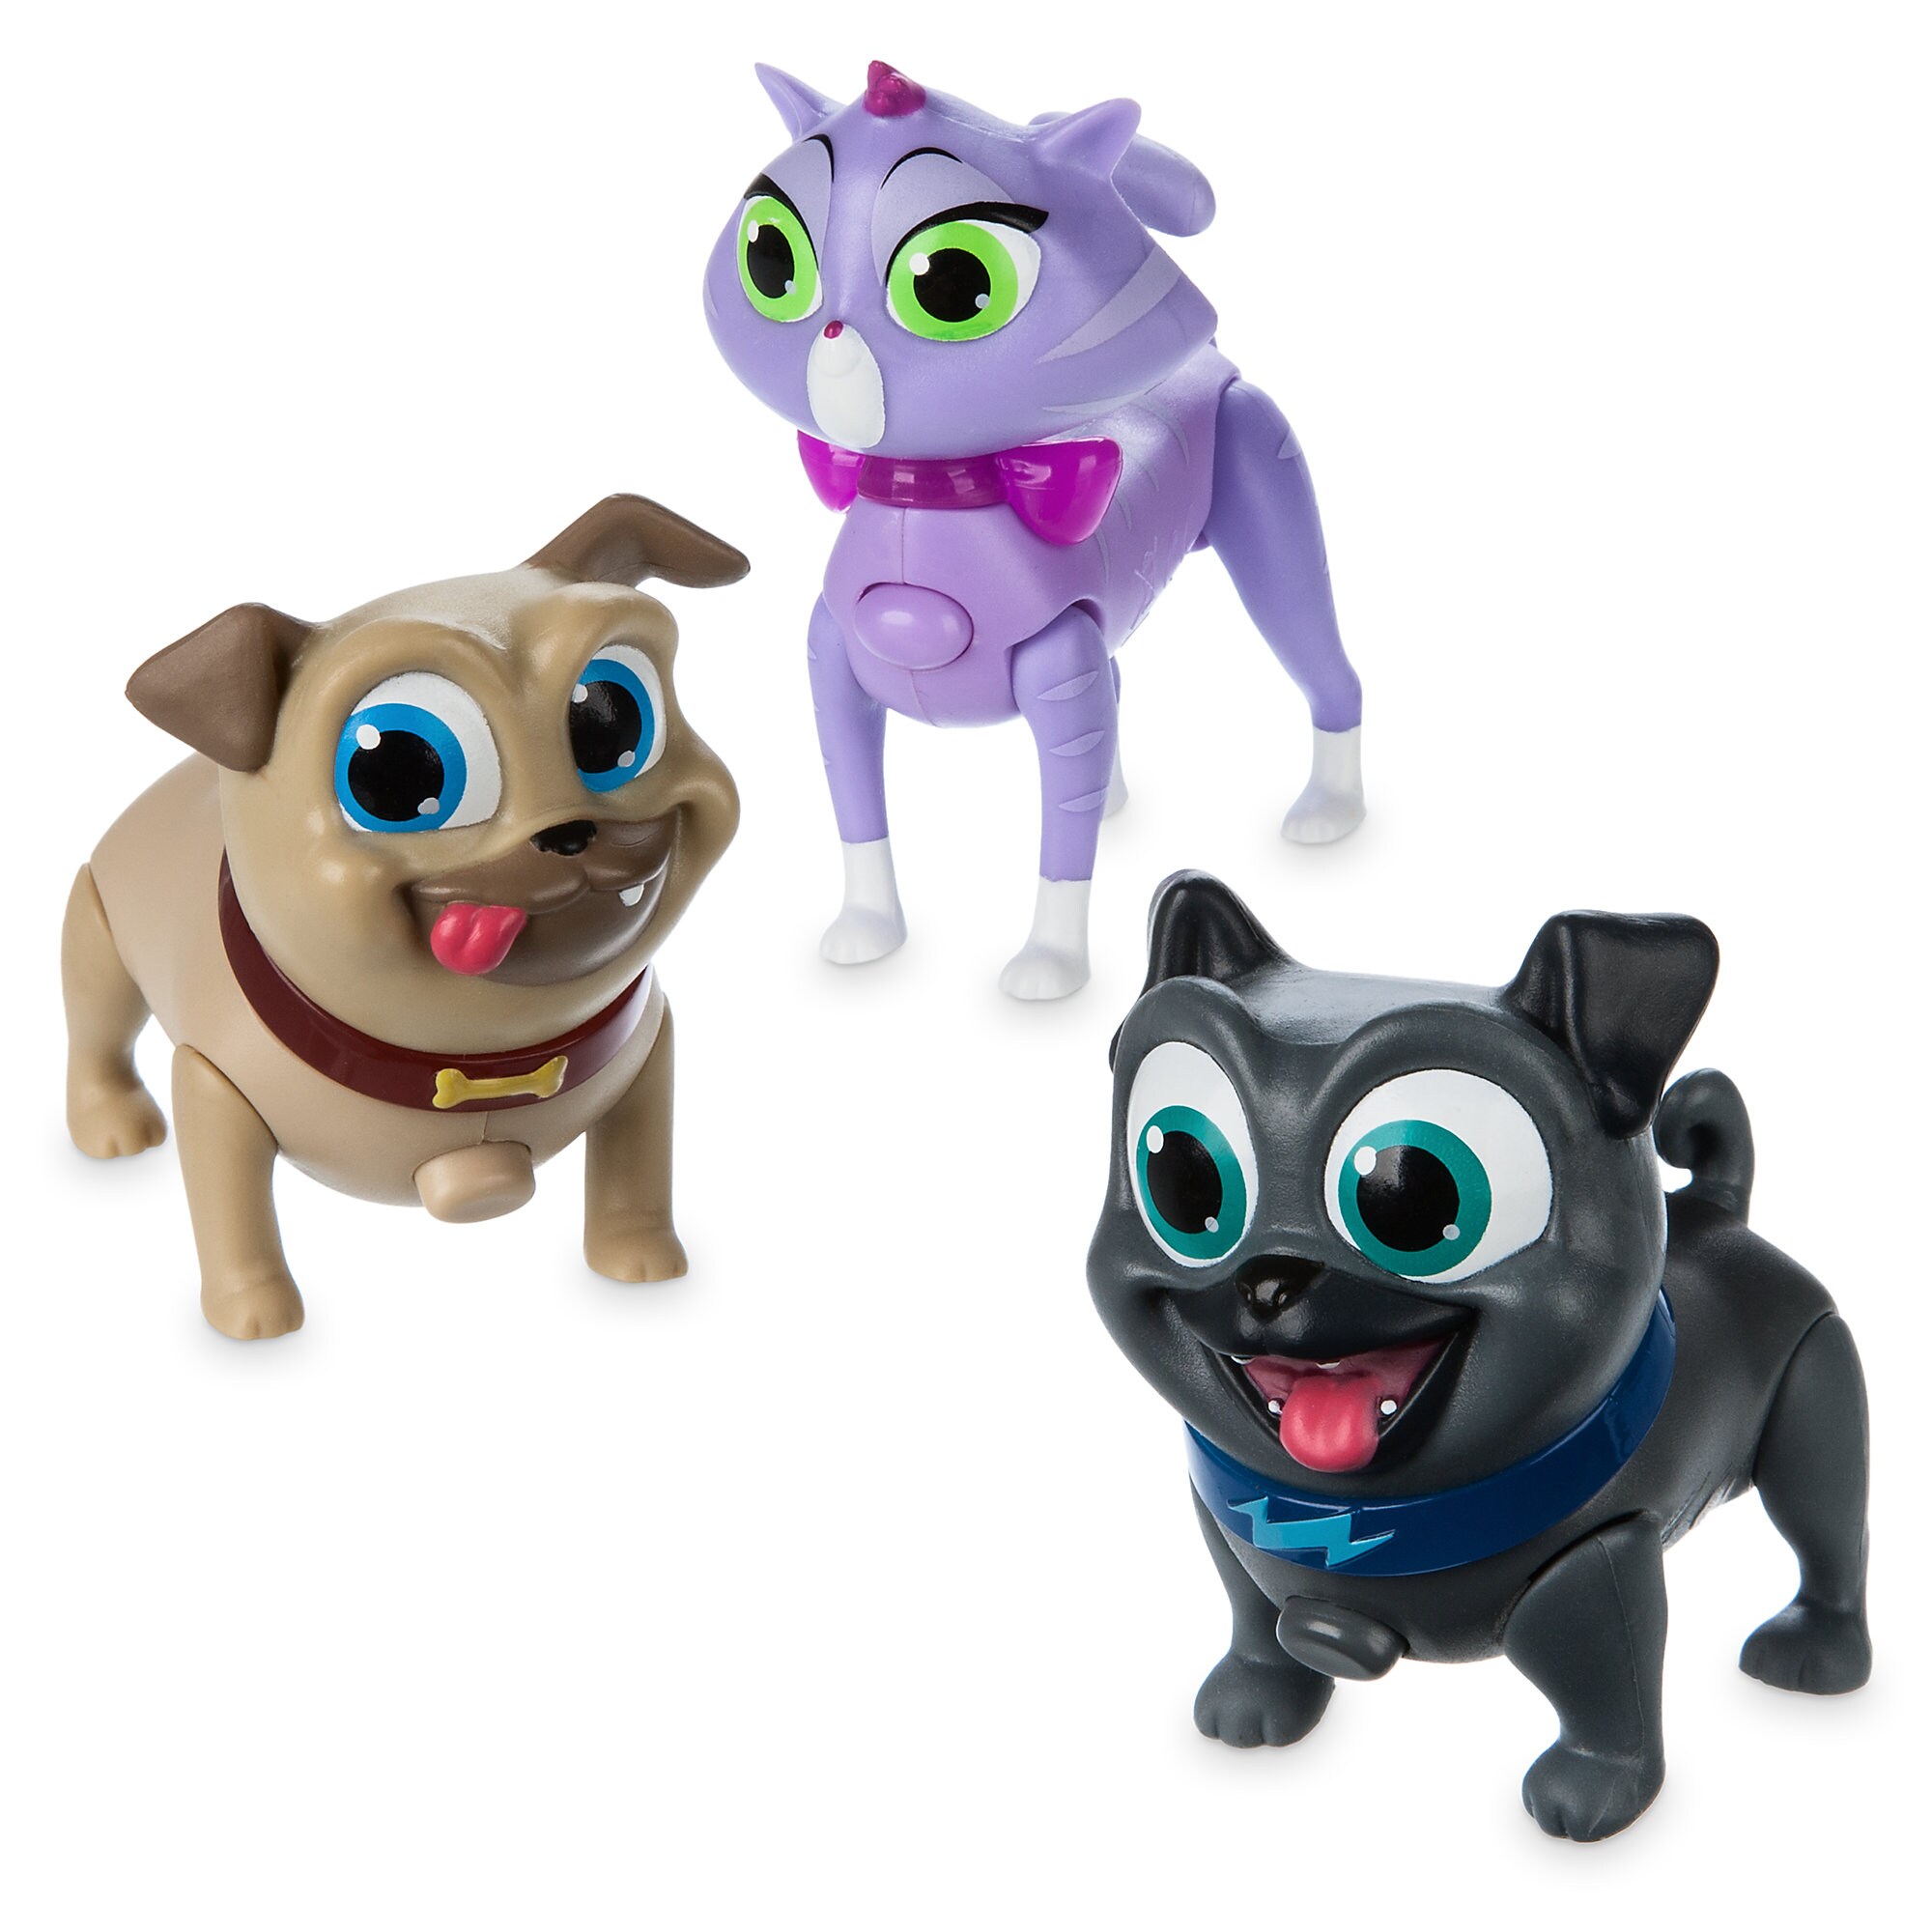 Puppy Dog Pals Ultimate Doghouse Playset with Light-Up Figures